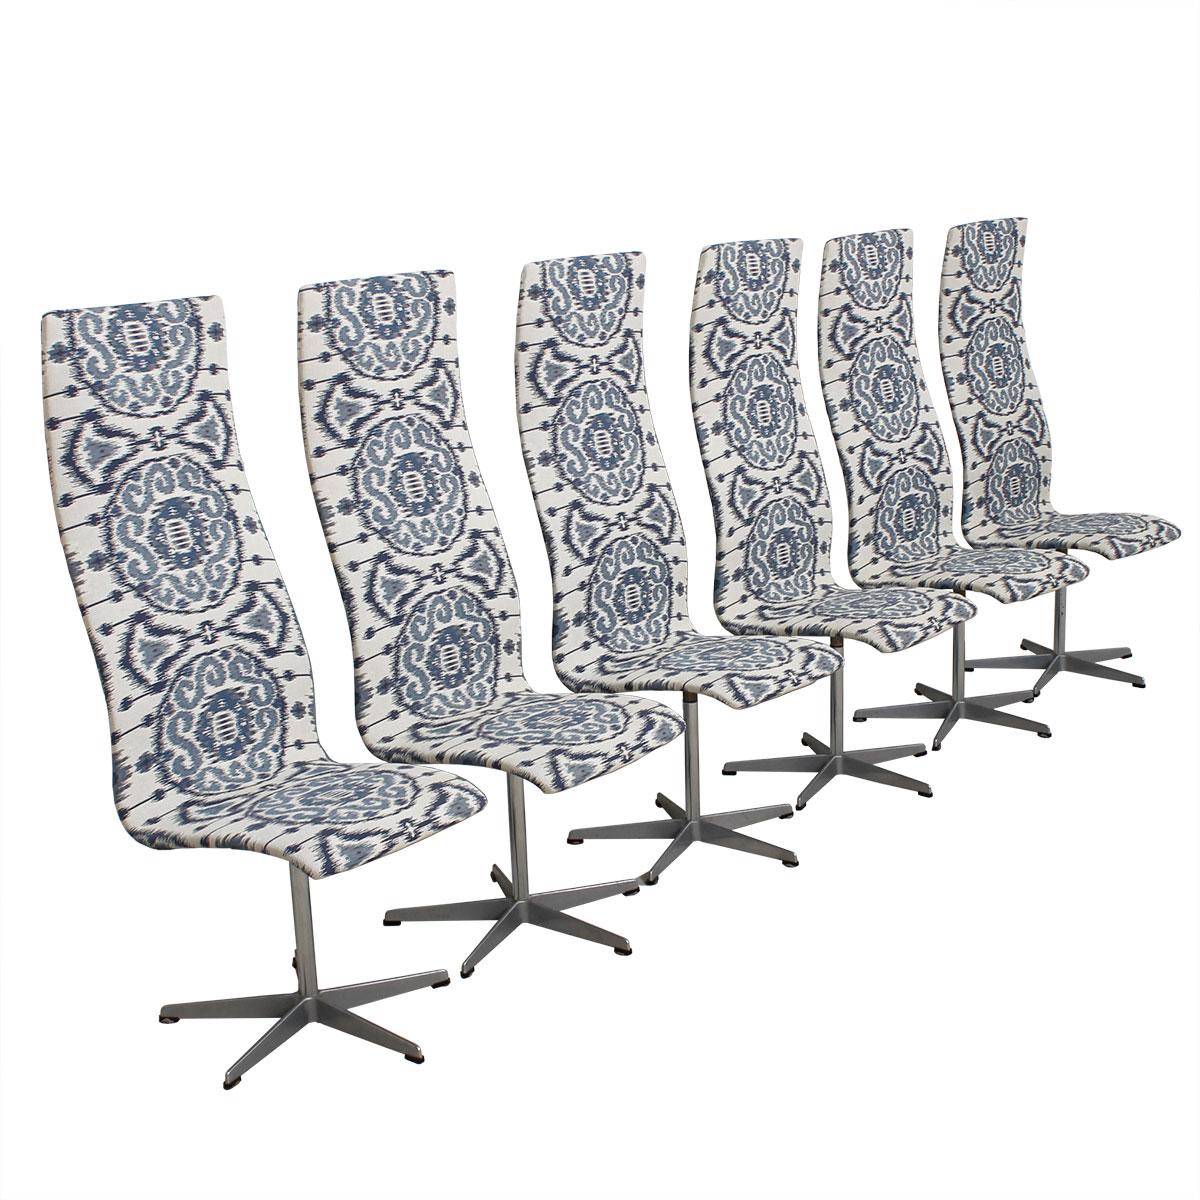 Set of 6 Vintage Fritz Hansen Oxford Chairs in New Blue & White Ikat, 70’s

Additional information:
Material: Upholstery, steel
We are extremely proud to offer this stunning (early production) set of six high back chairs by Arne Jacobsen for